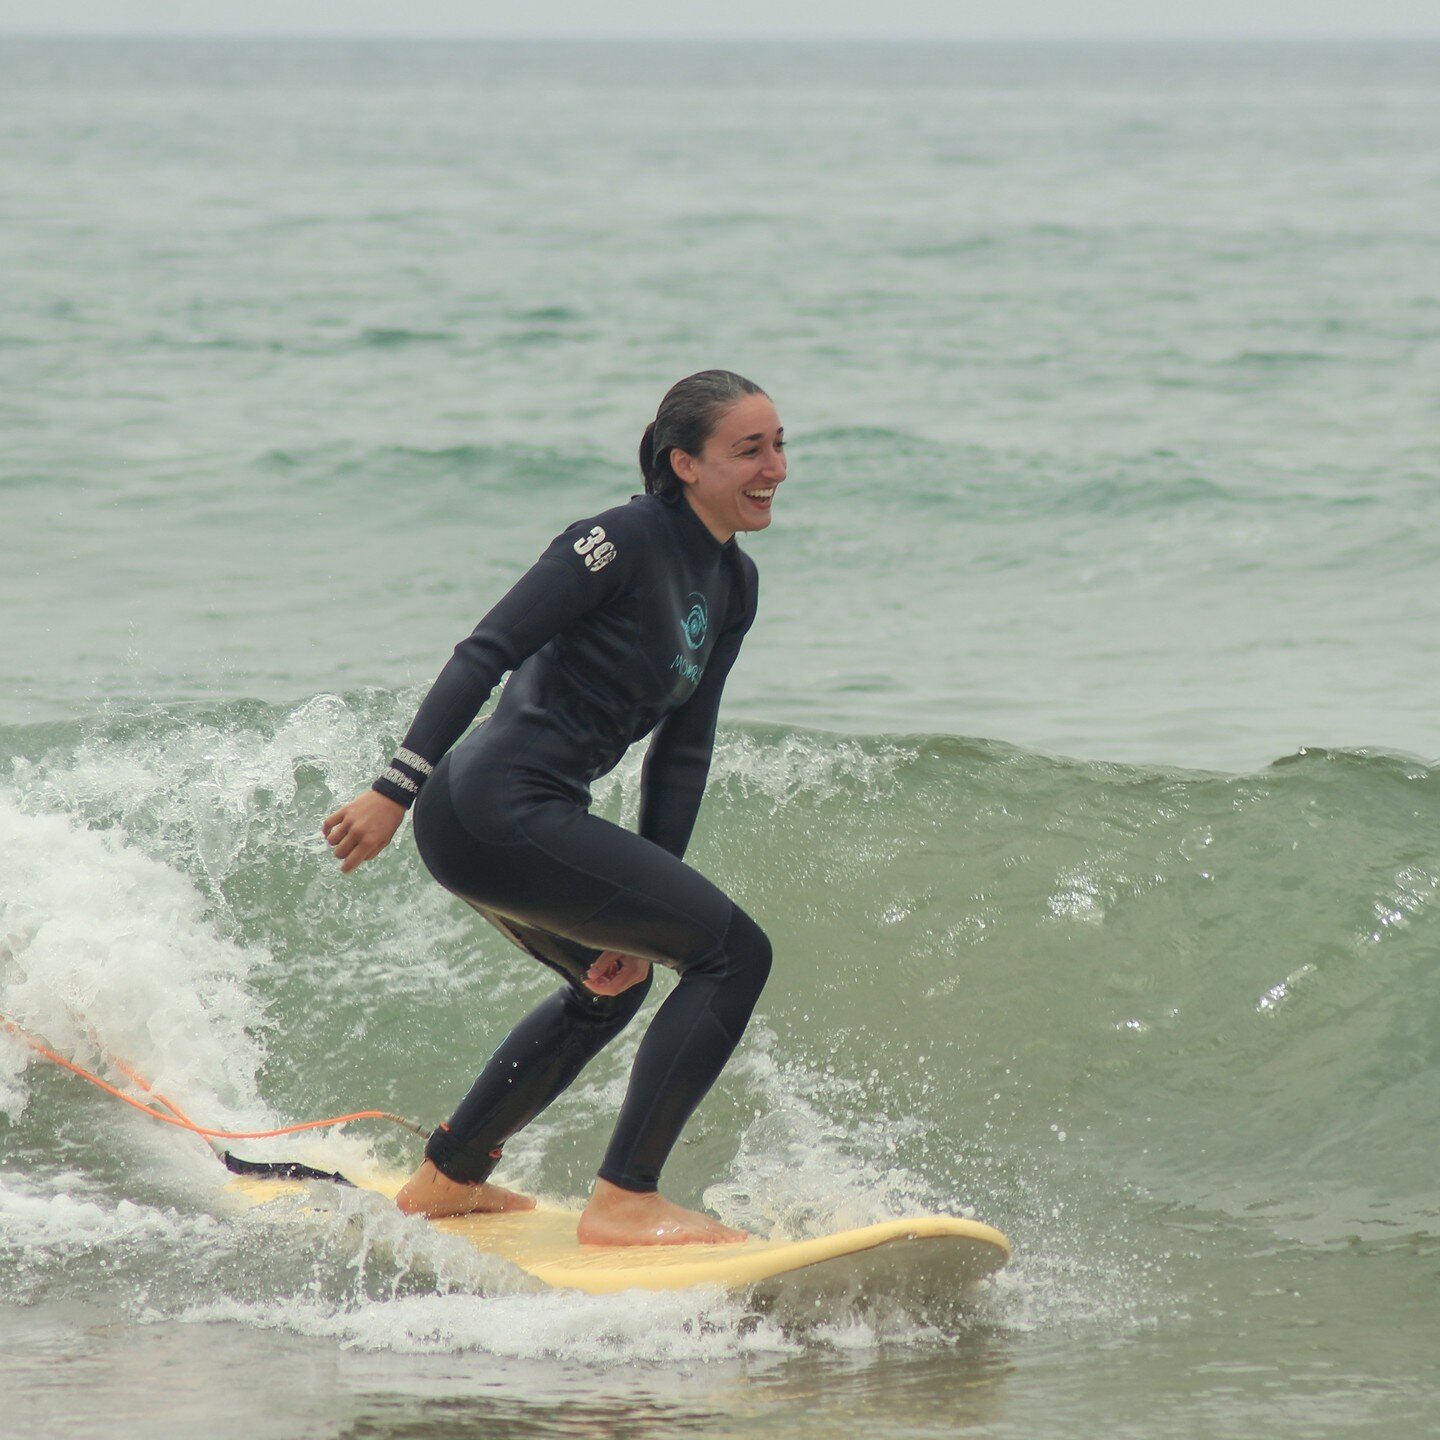 Happy faces!⁠
⁠
You know what they say, the best surfers are the one who have the most fun.⁠
Thanks girls and guys for great times in the water.⁠
⁠
#surfschool #learntosurf #surfingmorocco #taghazout #taghazoutsurfschool